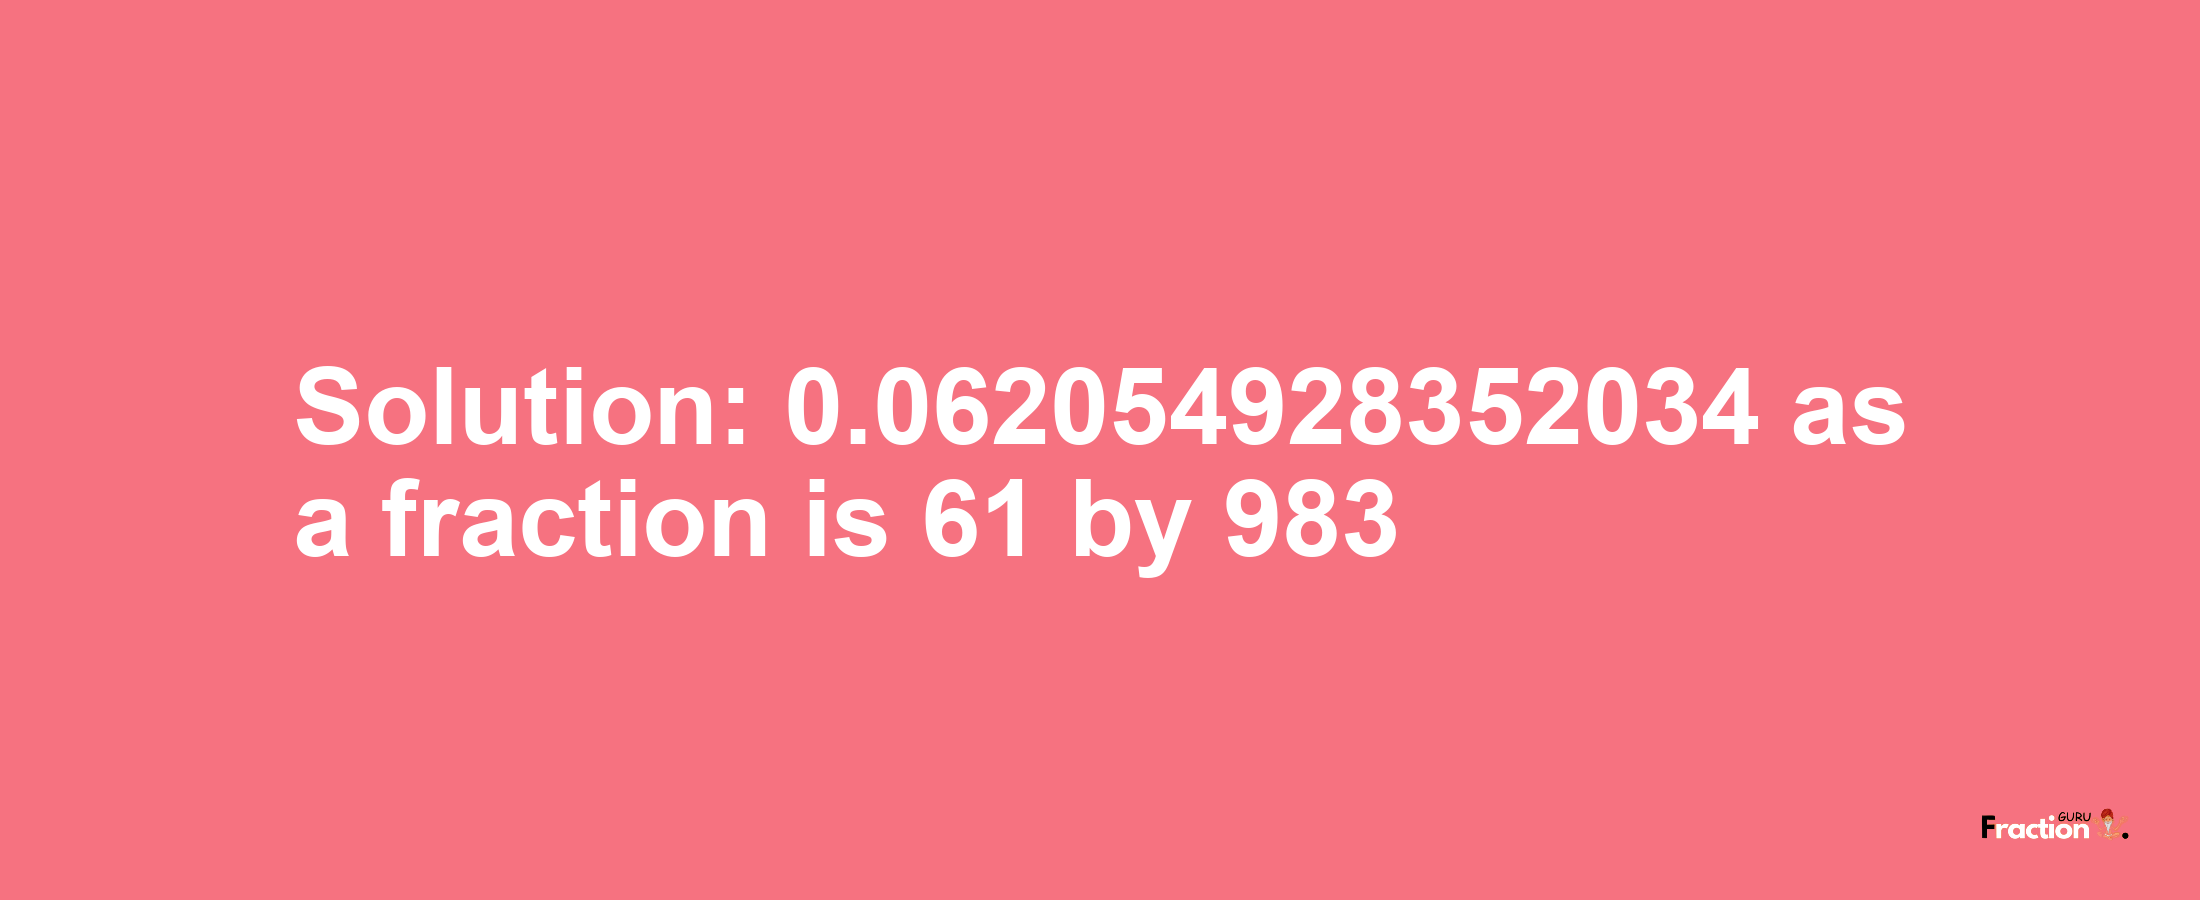 Solution:0.062054928352034 as a fraction is 61/983